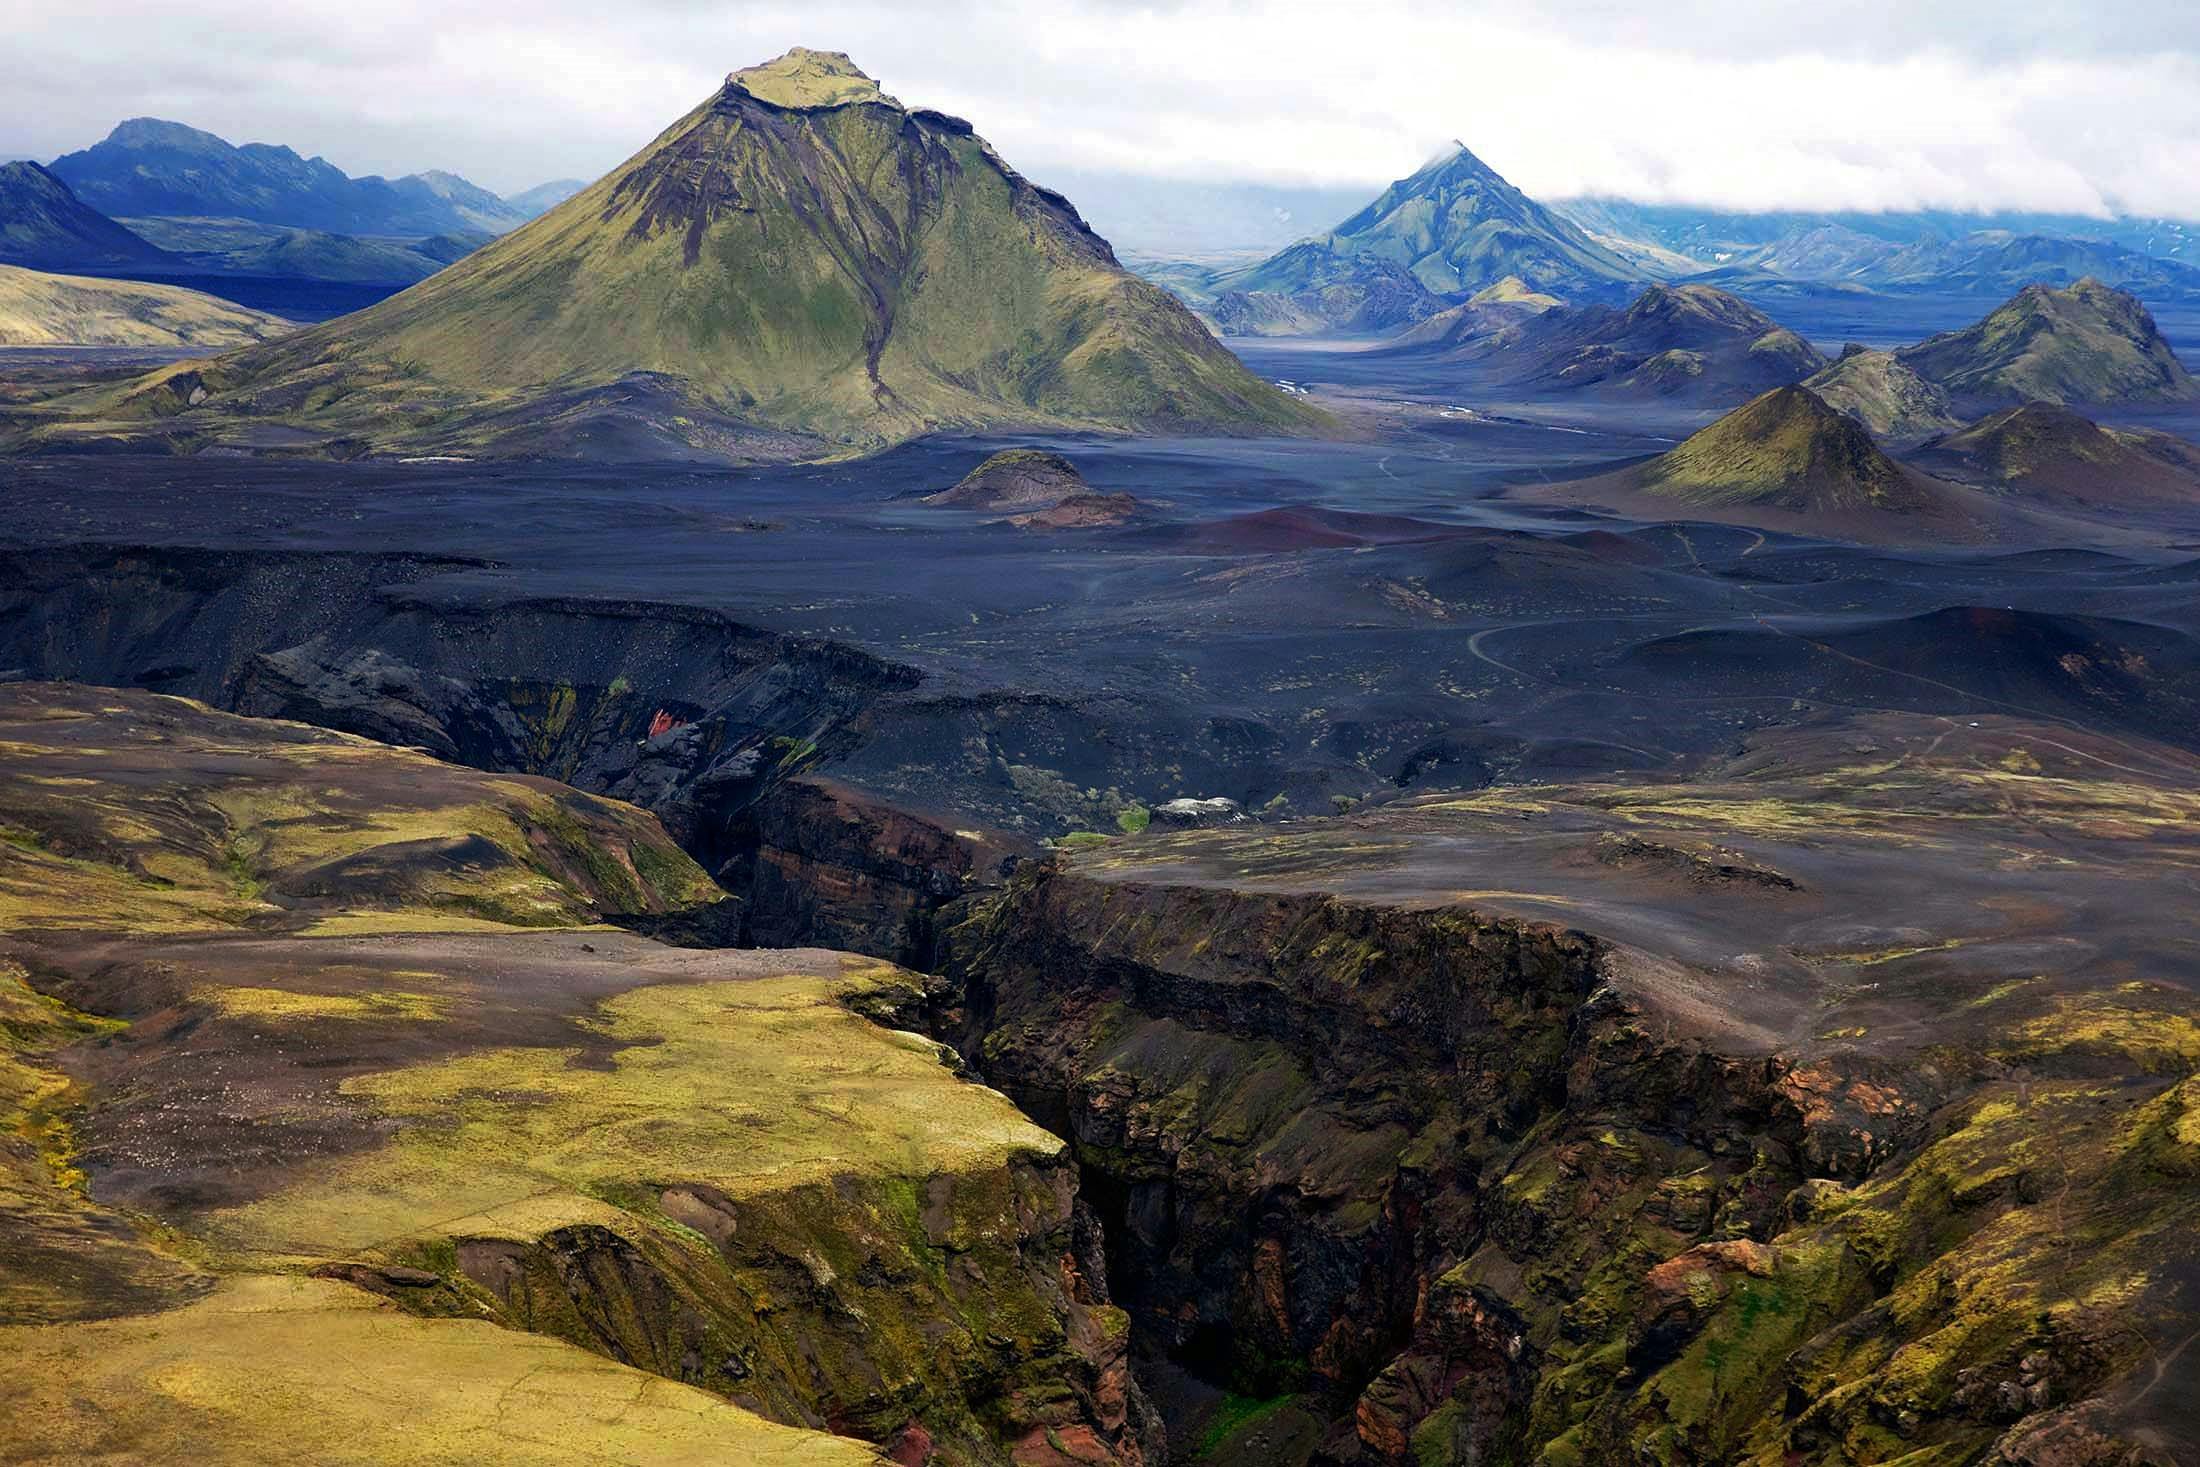 Iceland's landscapes include colossal glaciers and volcanoes